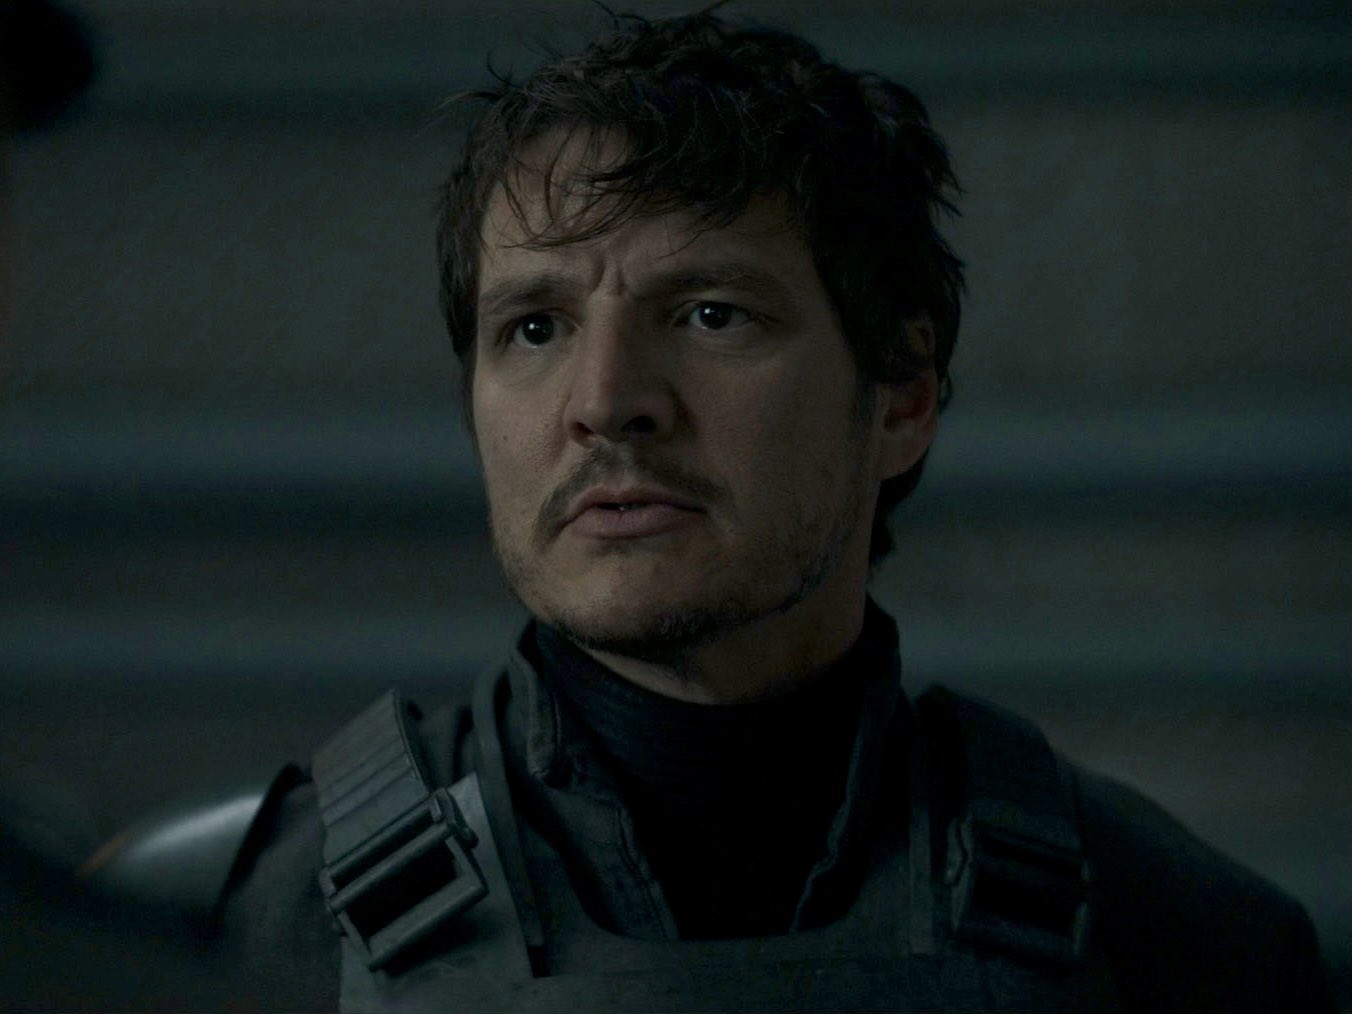 Pedro Pascal: Net worth, age, relationship, career, family